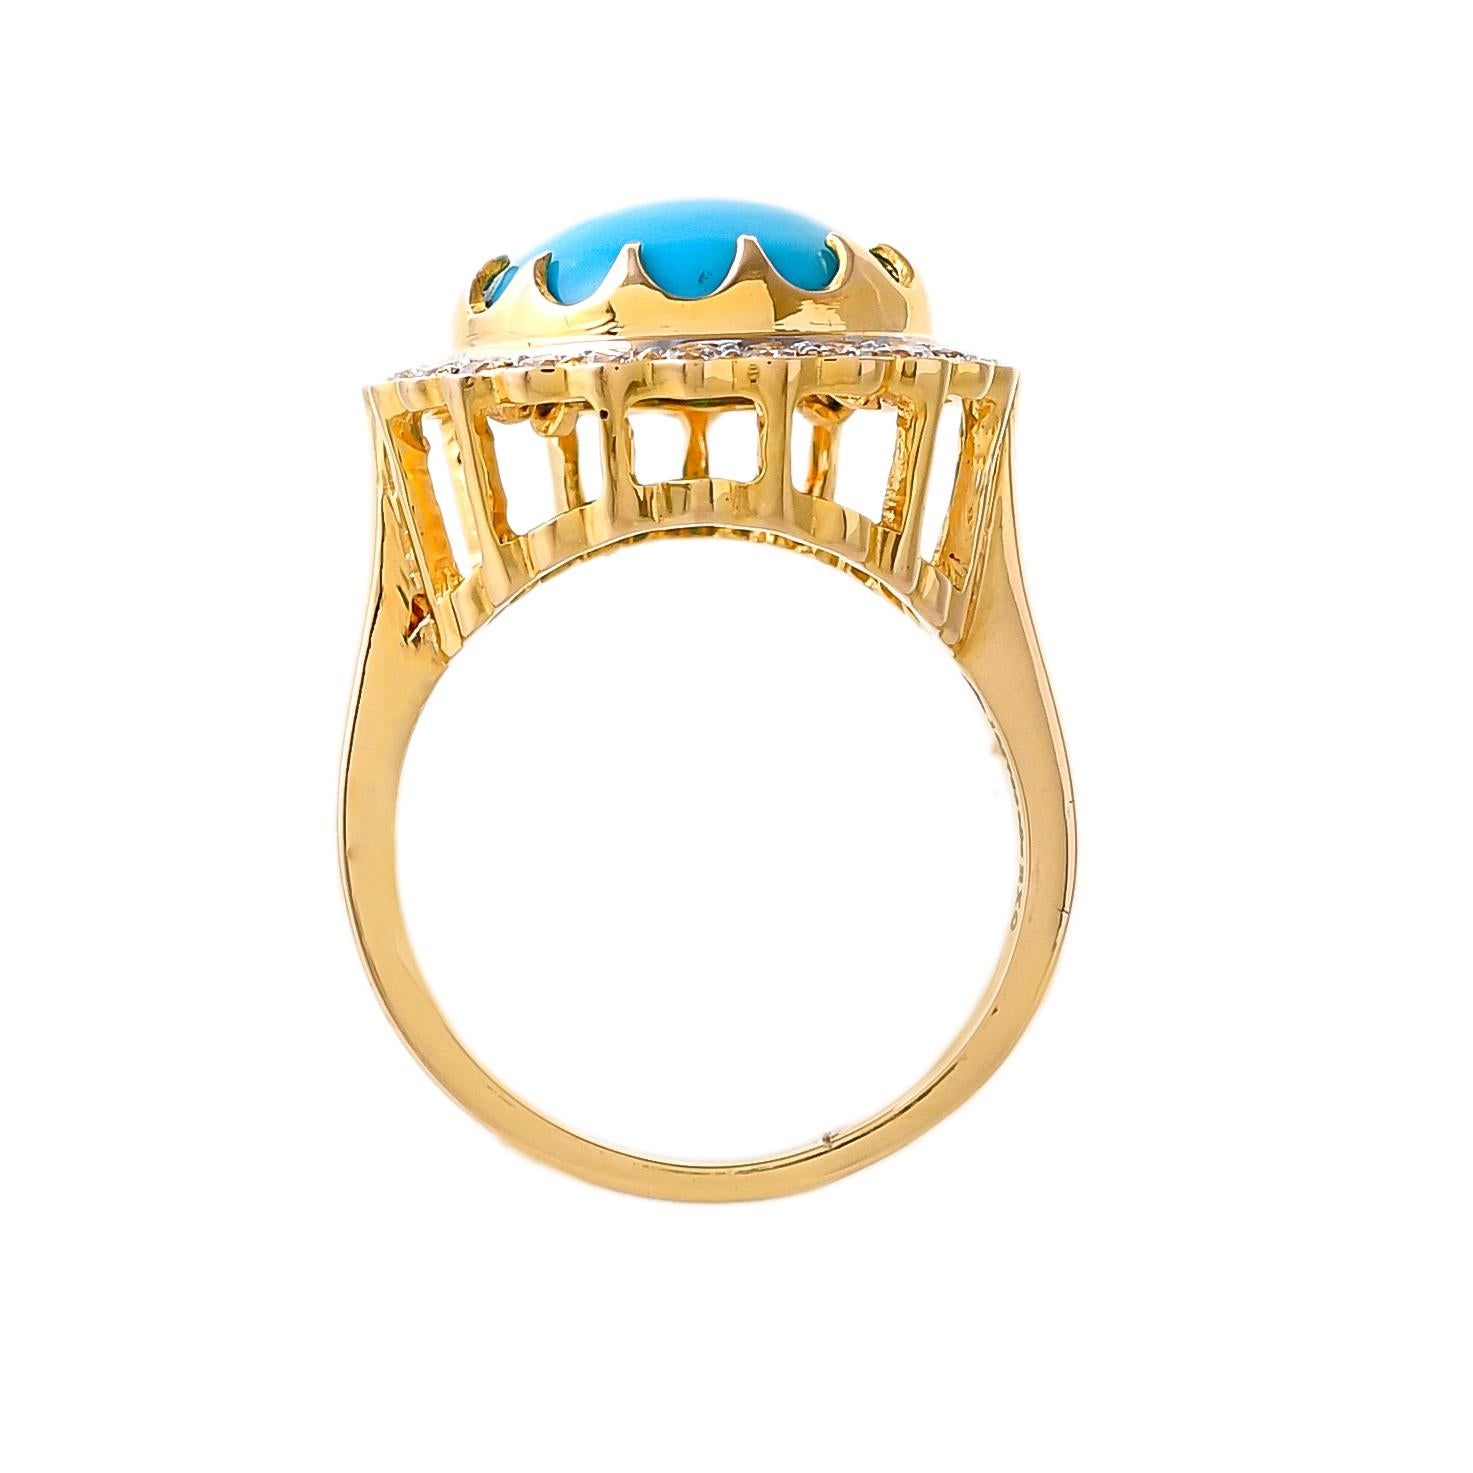 The turquoise cabochon within a gold prong setting weighing approximately 5.58 carats, framed by numerous sparkling white diamonds weighing approximately 0.54 carats, completed by a gold shank. Mounted in 18kt yellow gold.
Playful yet chic this ring